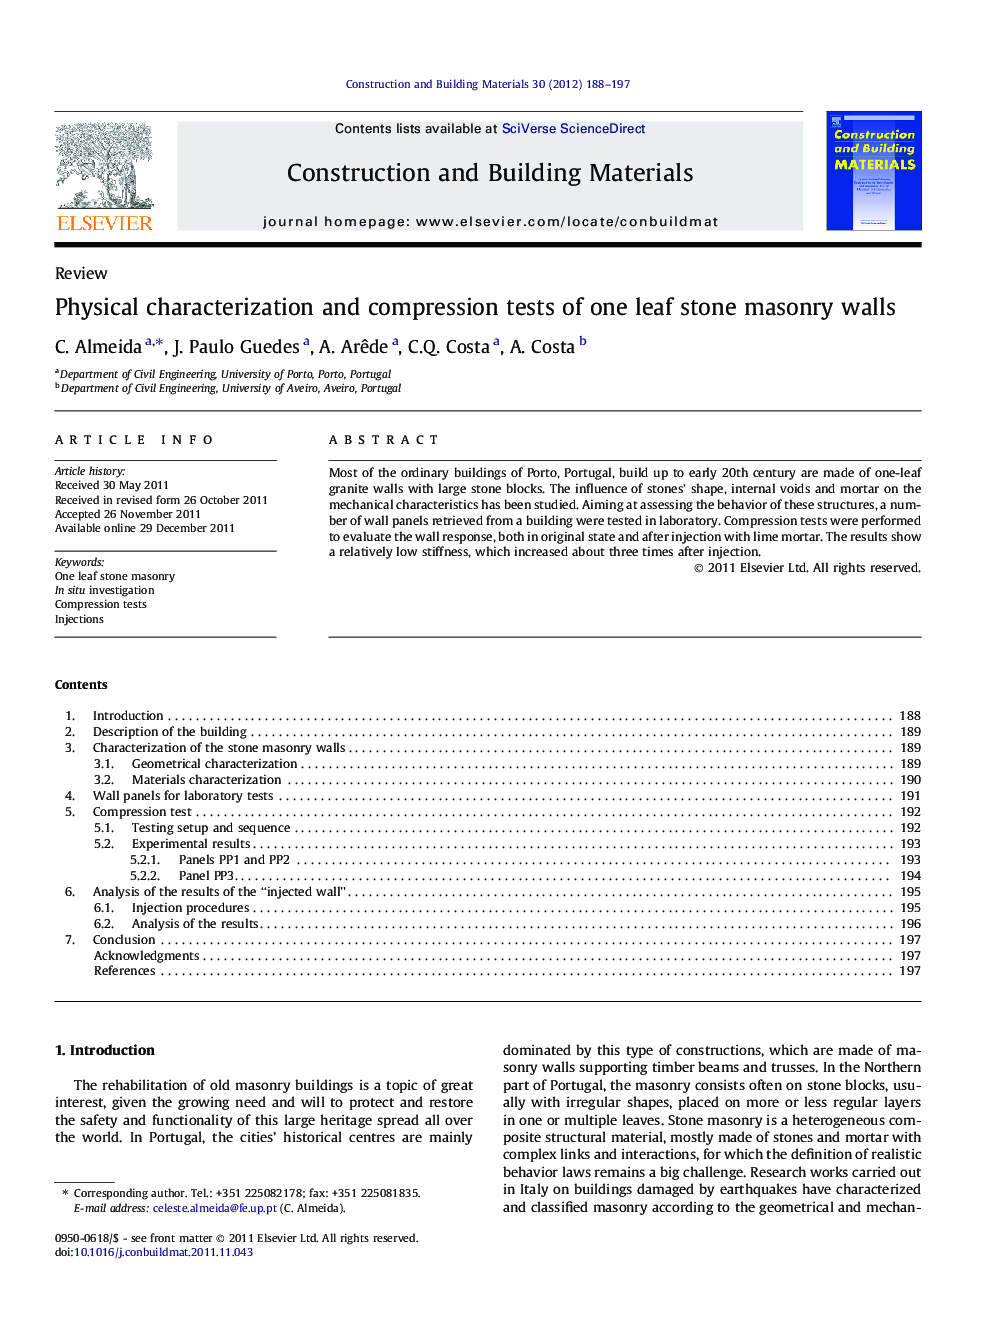 Physical characterization and compression tests of one leaf stone masonry walls